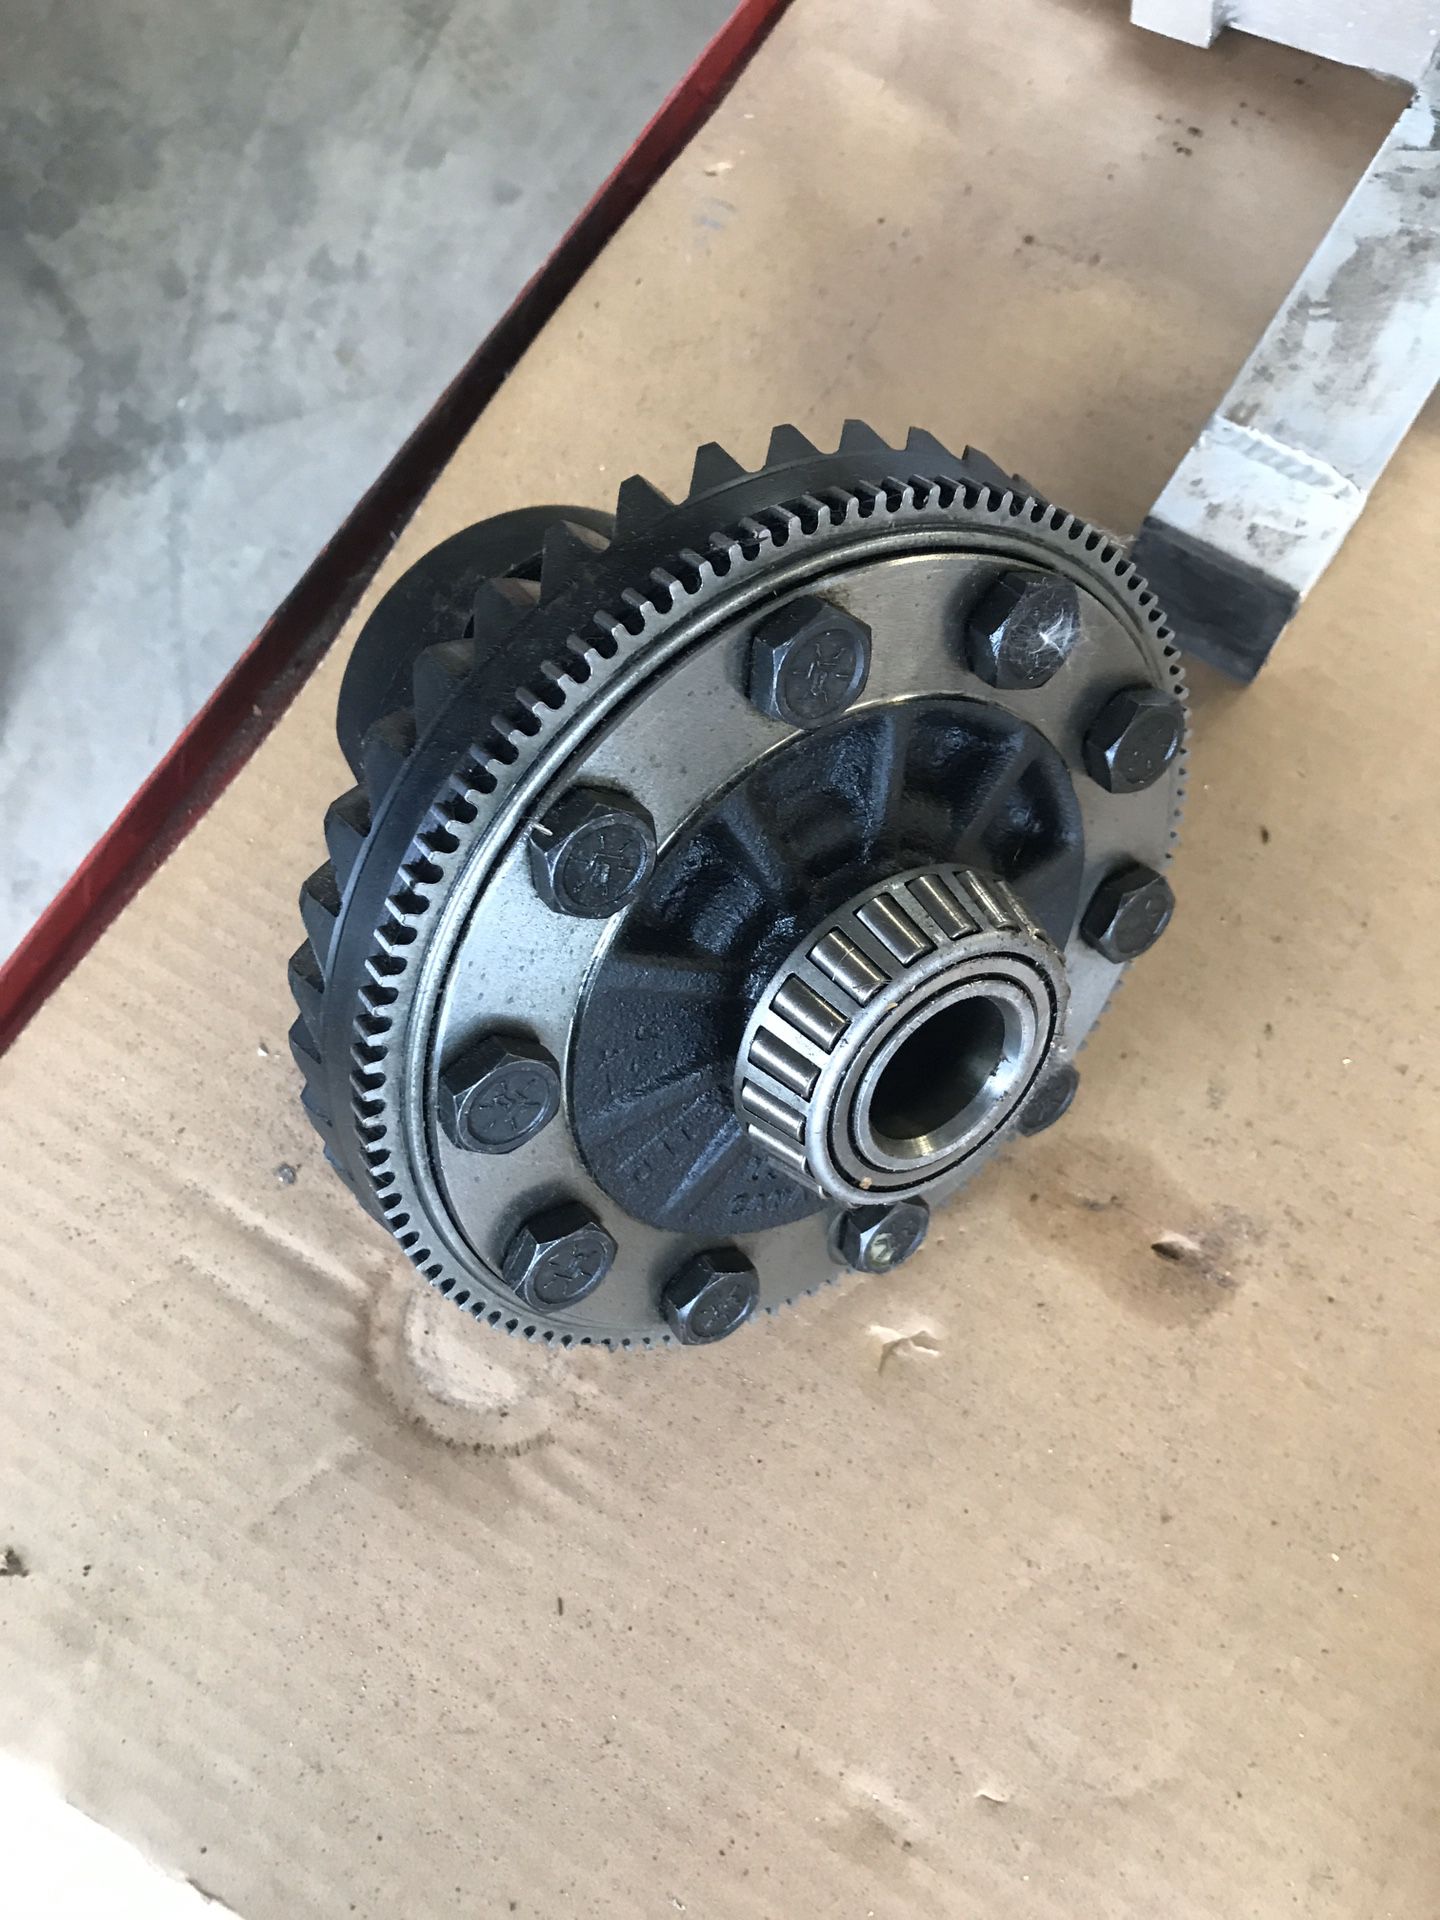 GM 10 bolt 7.5, 7 5/8 GM posi unit. 2:73 gears limited slip most common use is 90’s S10 or equivalent. New condition.